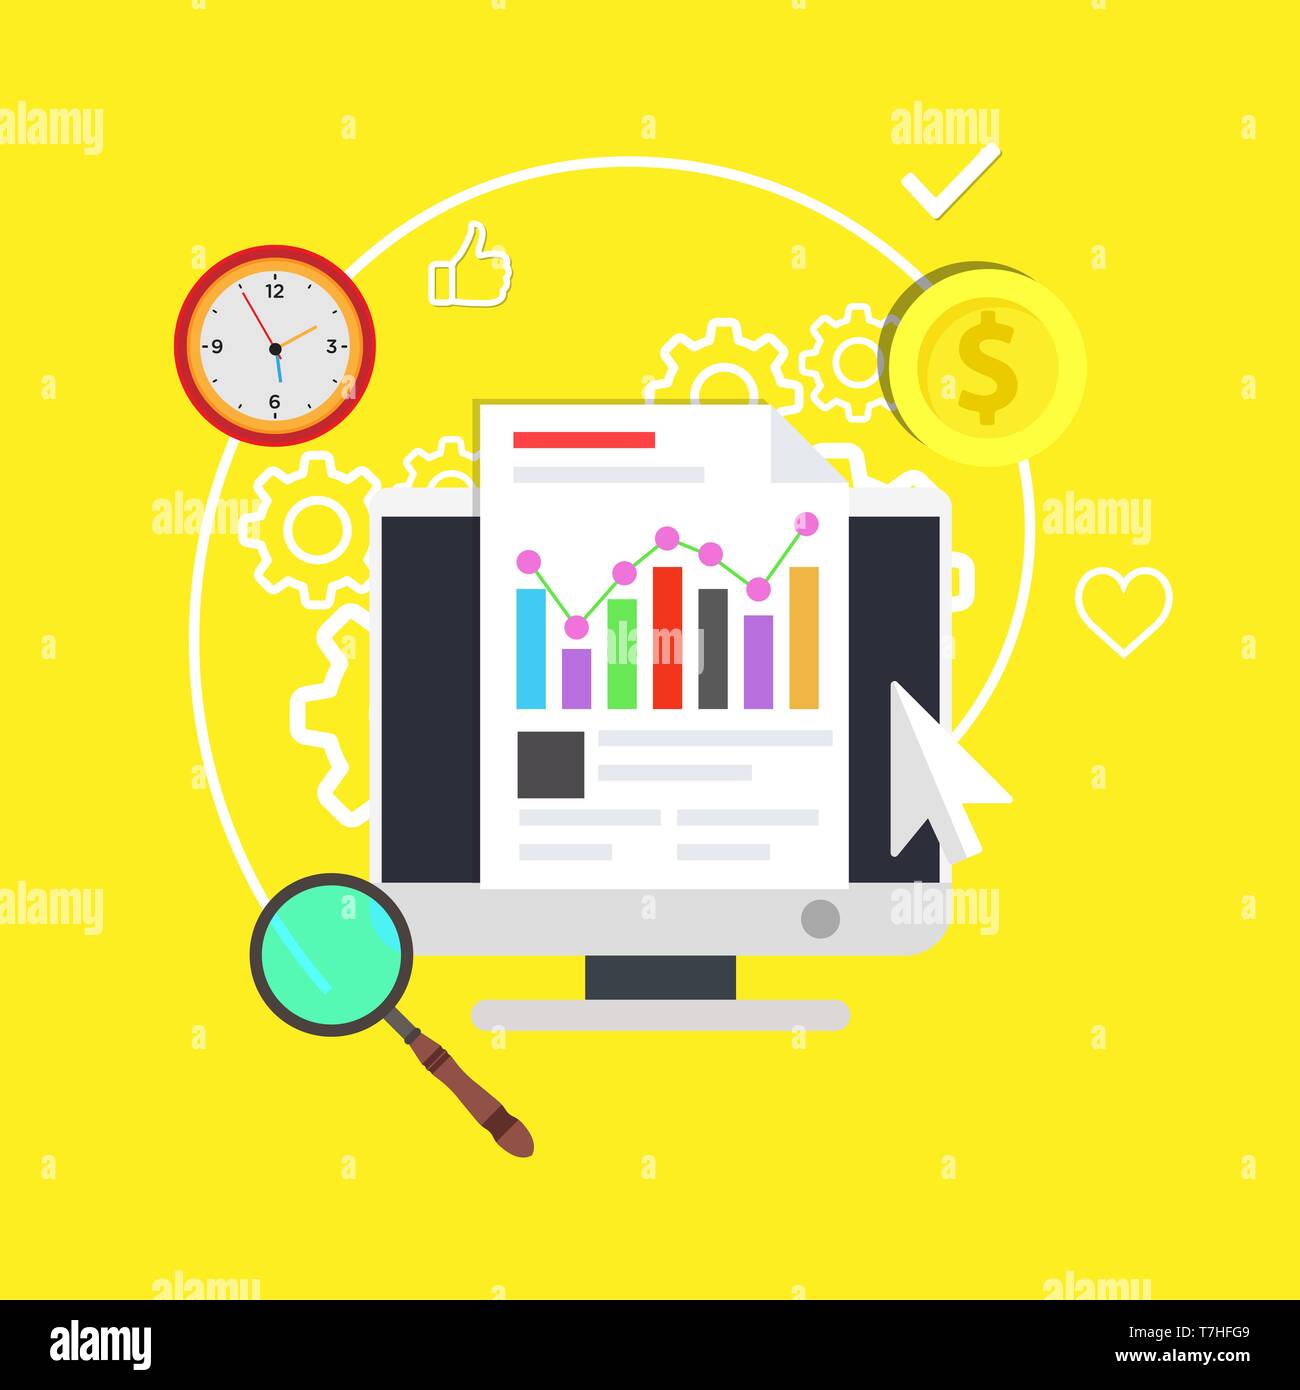 Training icon business concept flat design Vector Image